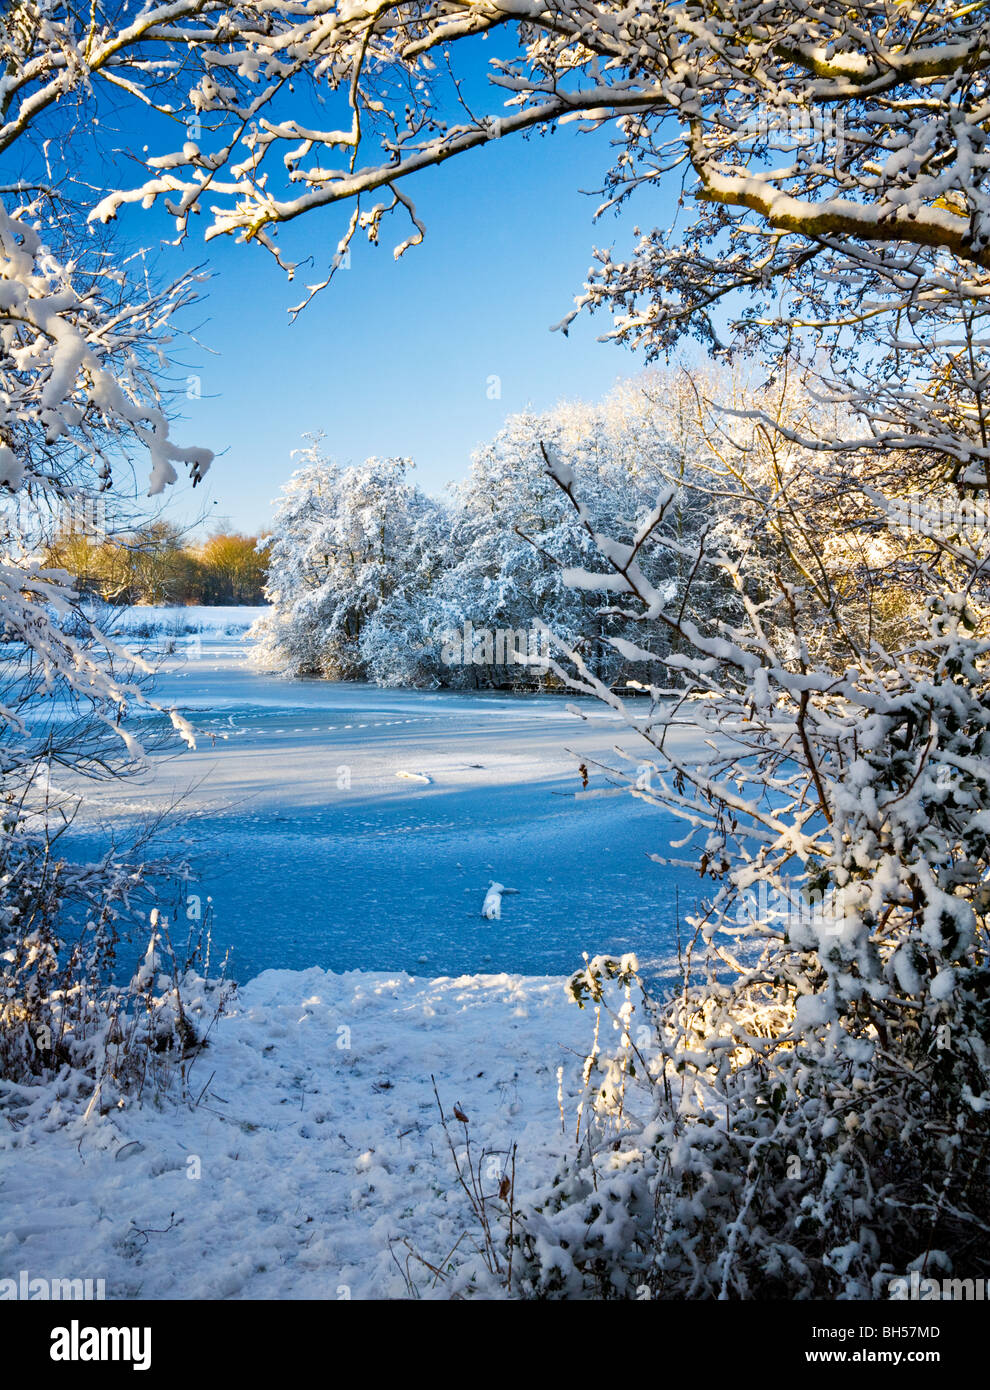 The frozen waters of a small lake known as Liden Lagoon in Swindon, Wiltshire, England, UK taken in January 2010 Stock Photo